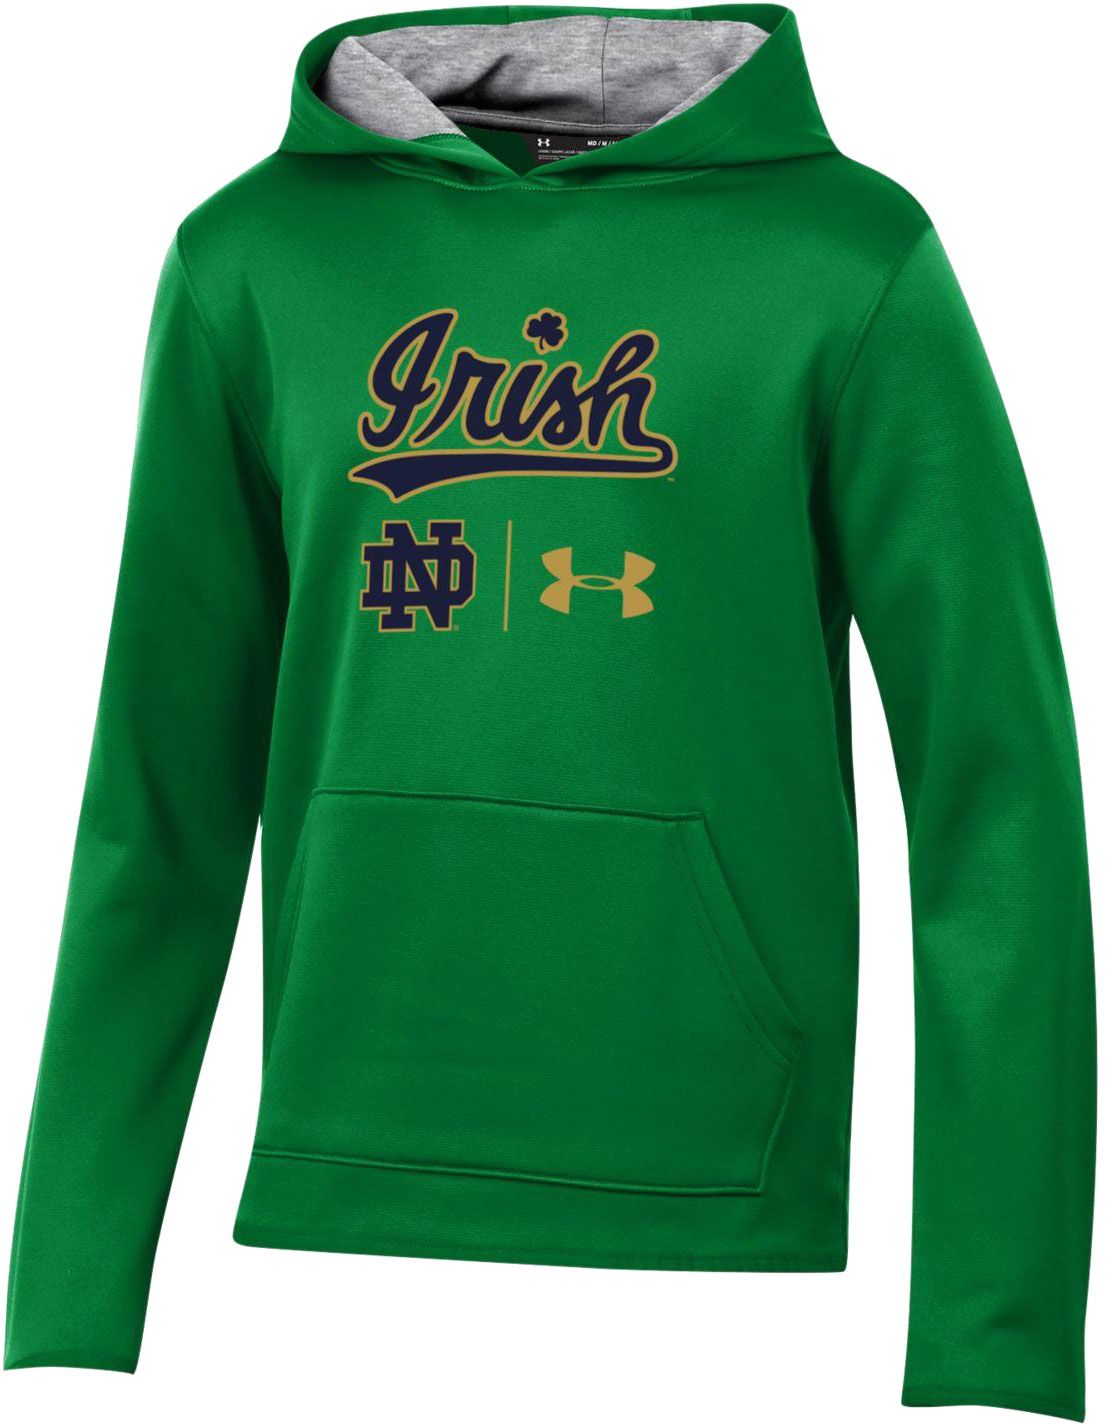 notre dame youth under armour